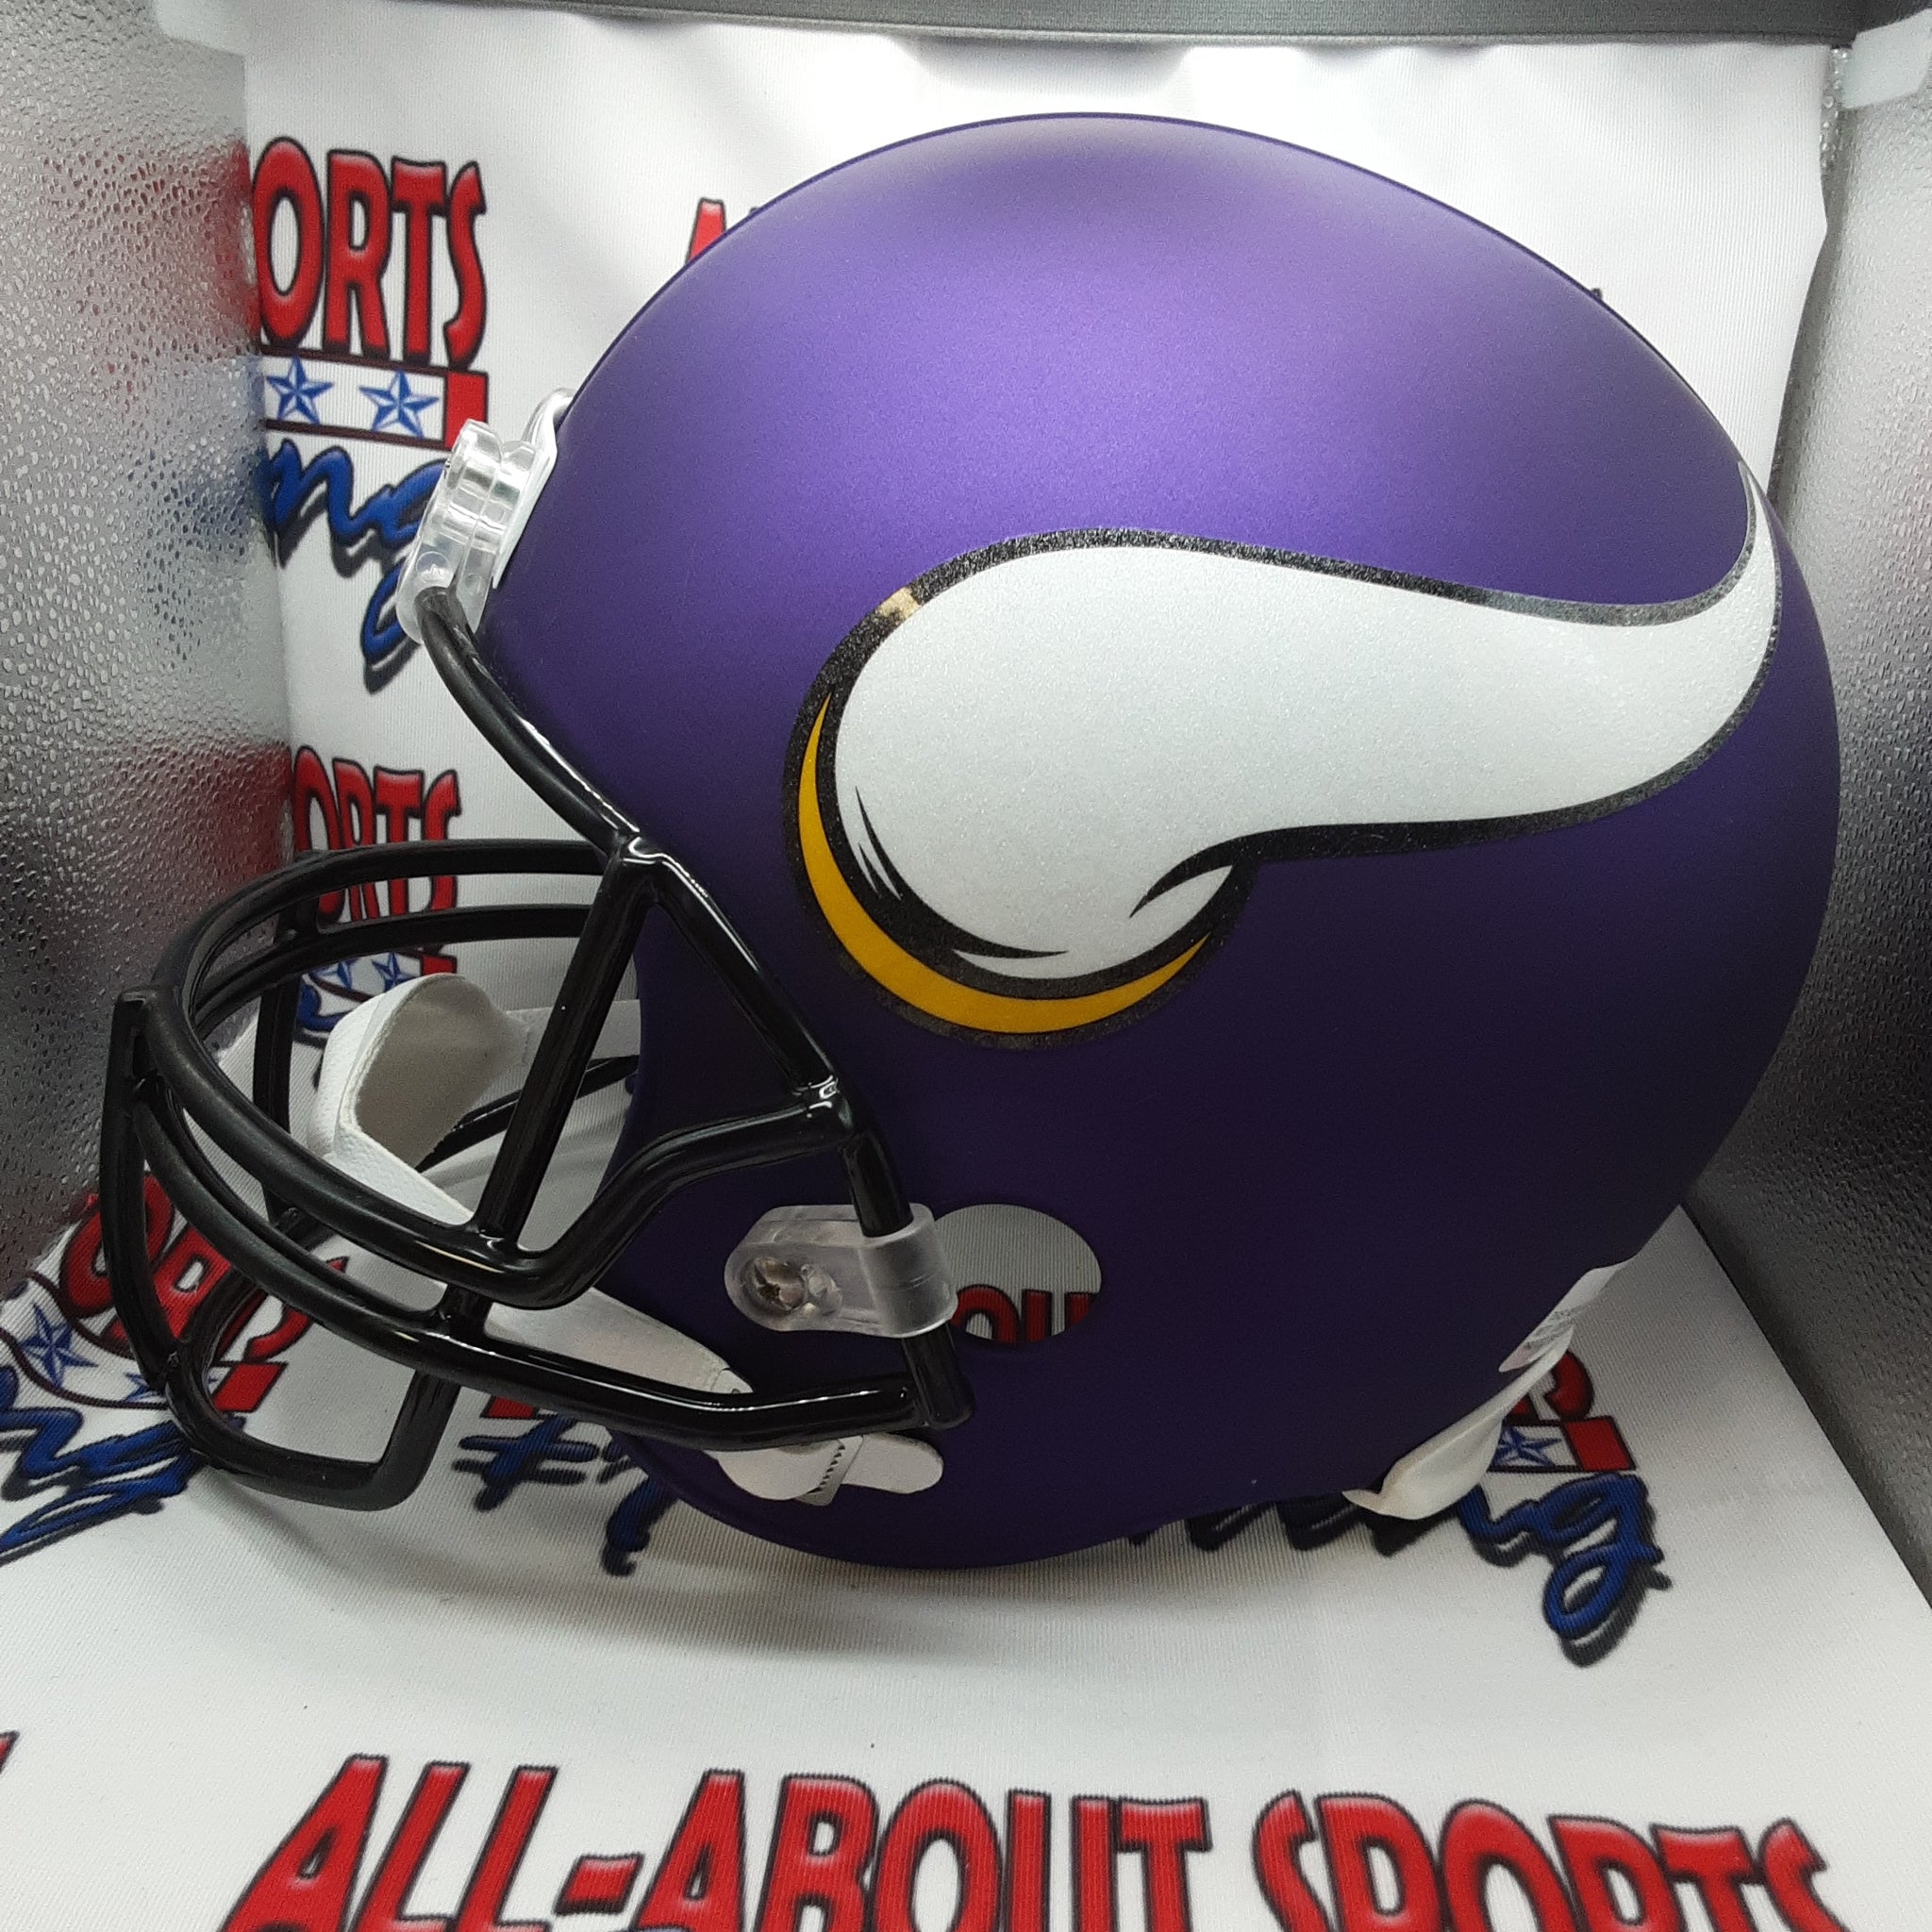 Kyle Rudolph Authentic Signed w/Inscription Autographed Full-size Replica Helmet Beckett